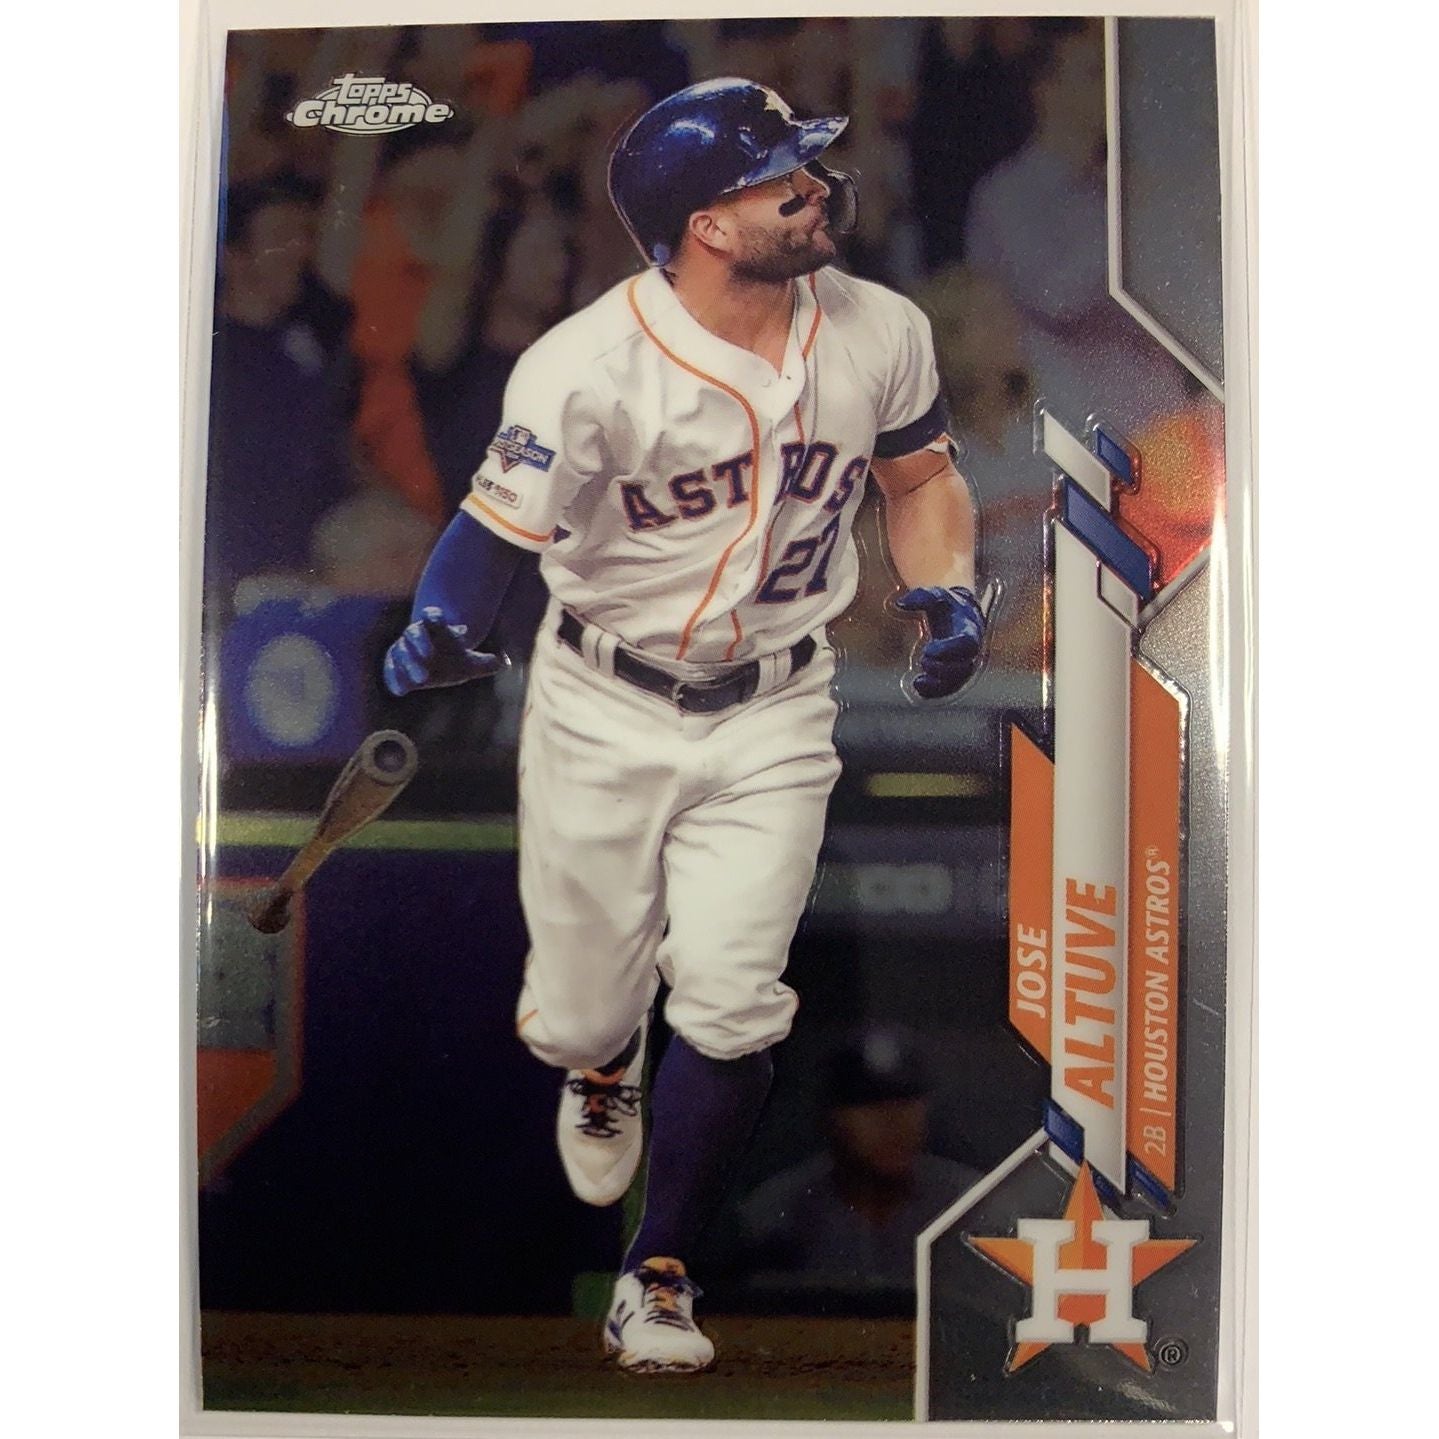  2020 Topps Chrome Jose Altuve Base #42  Local Legends Cards & Collectibles